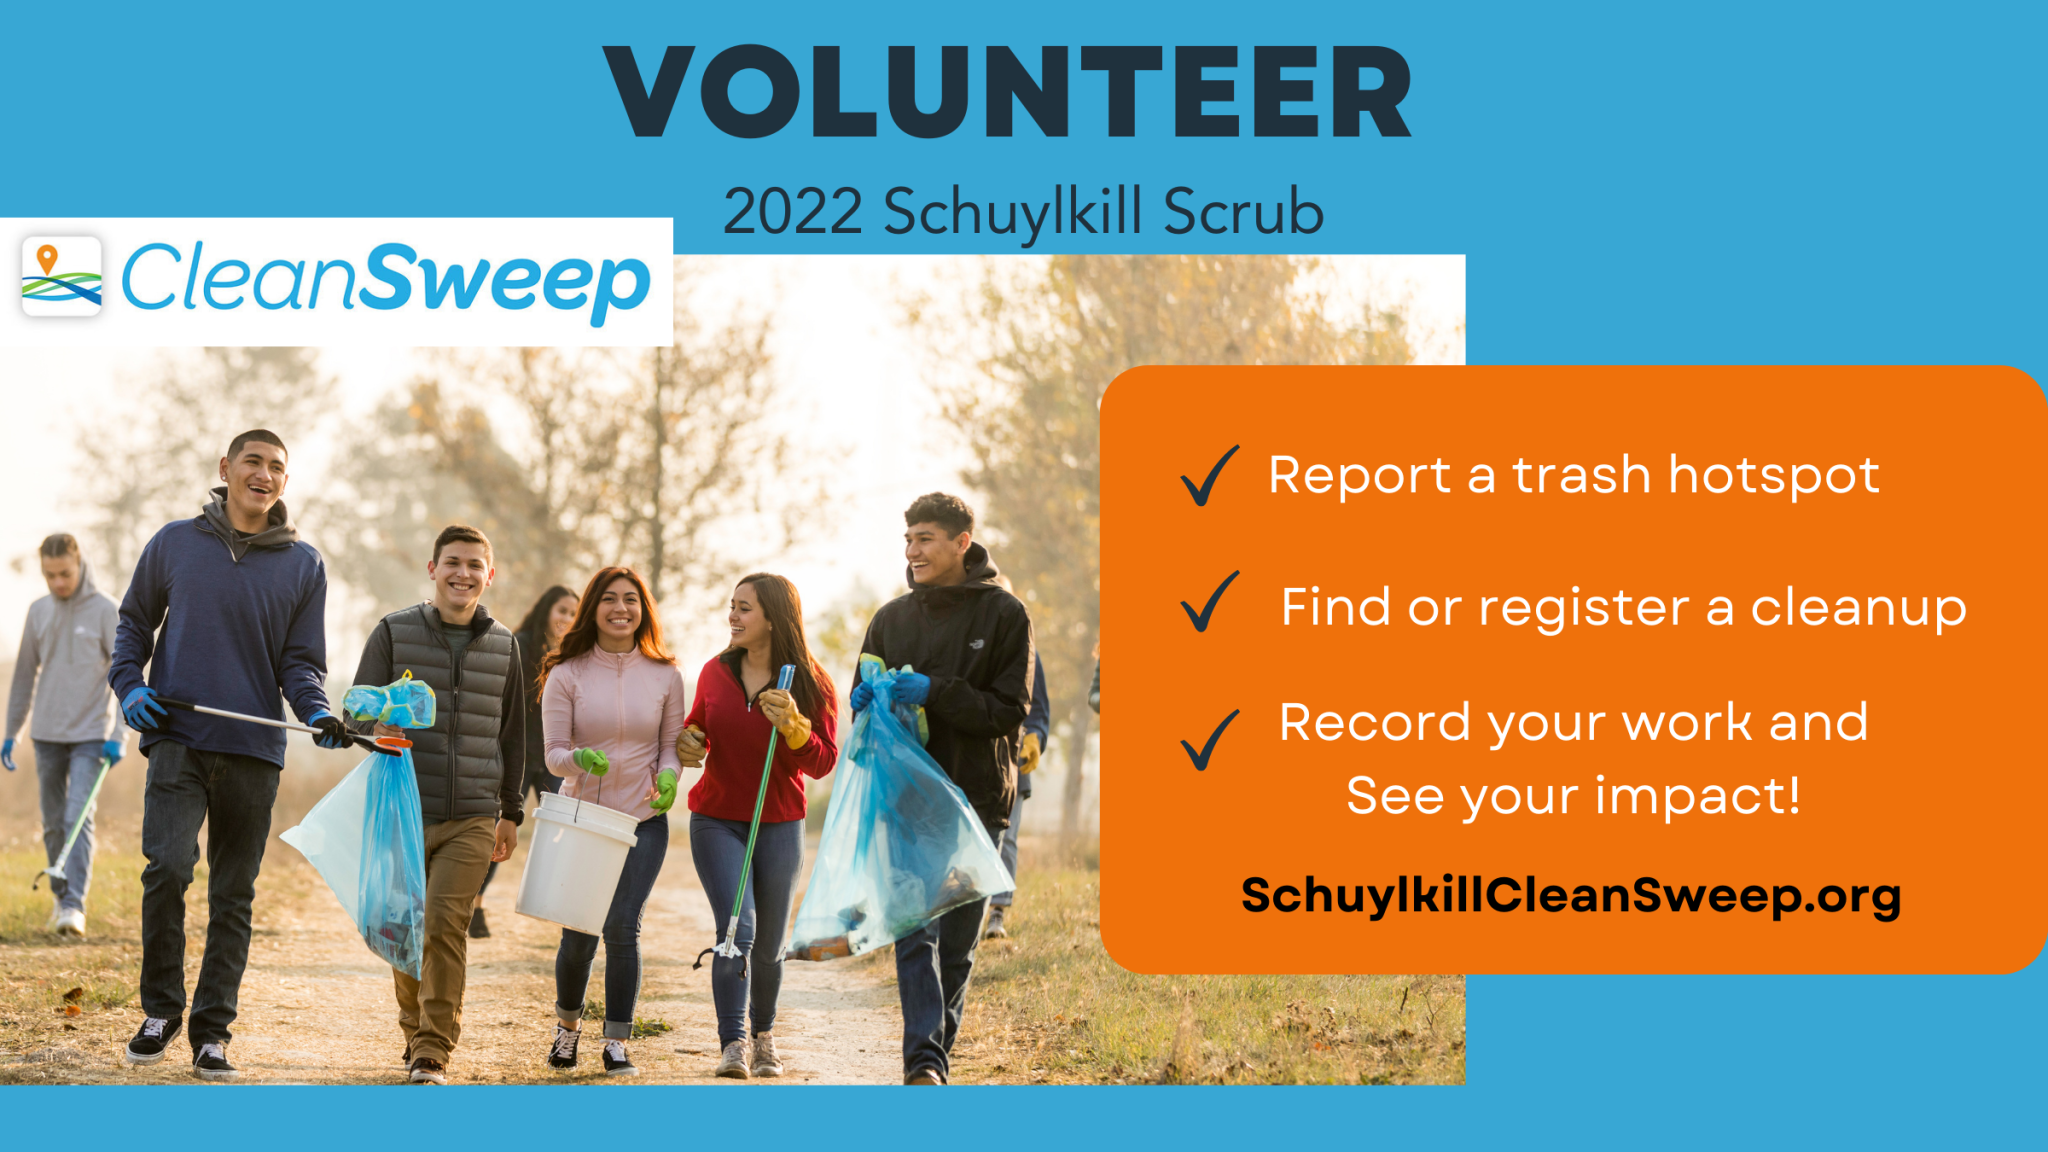 CleanSweep is a smart-phone app and web-based dashboard designed to engage volunteers in cleaning up the Schuylkill River Watershed.